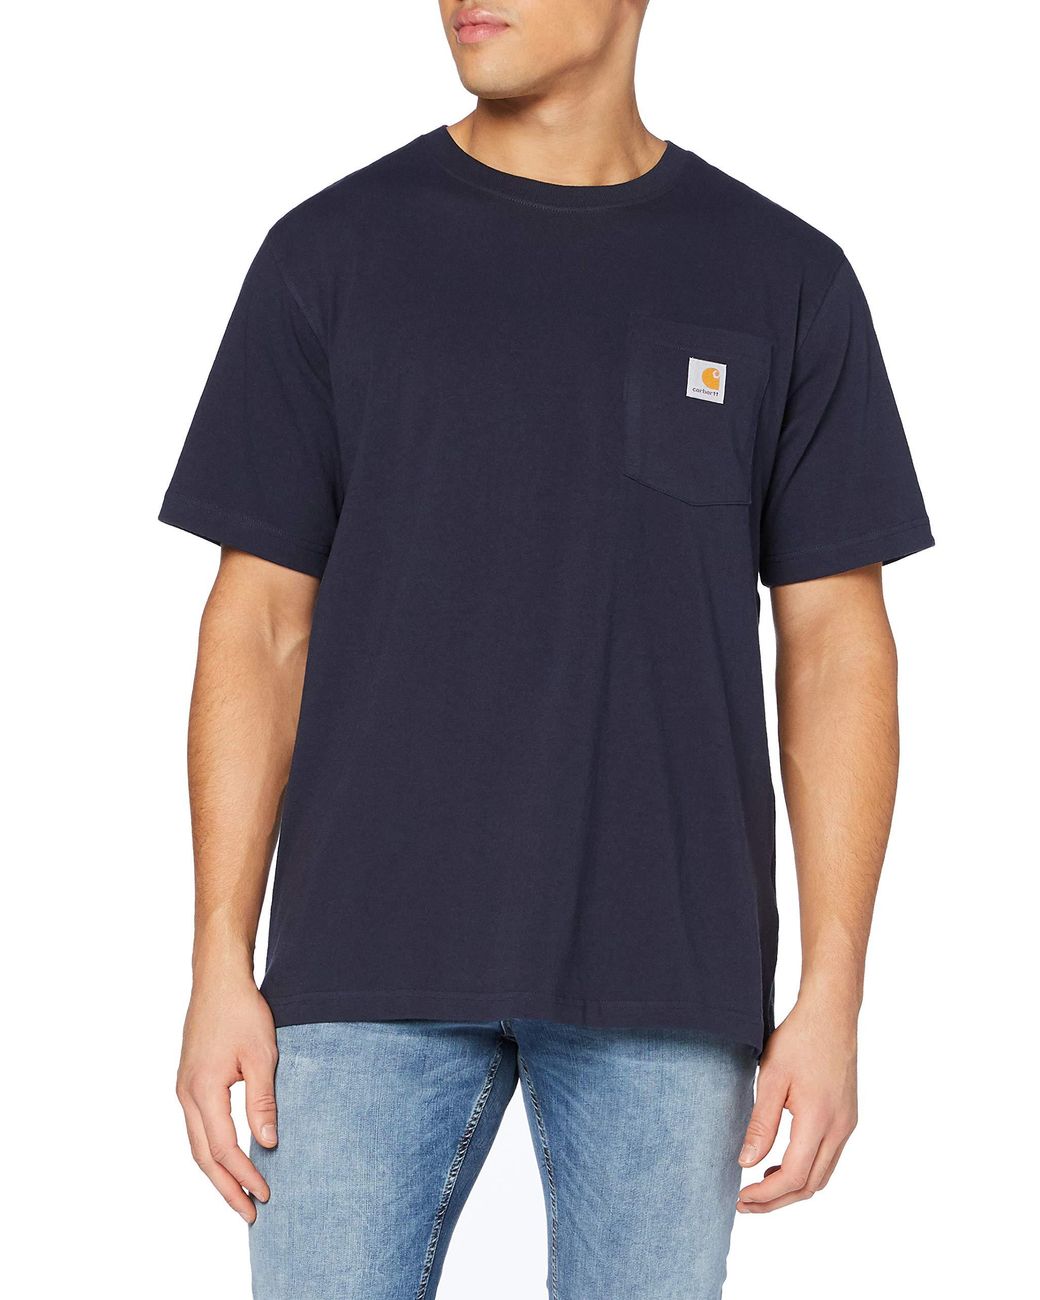 Carhartt Cotton Relaxed Fit T-shirt in Navy (Blue) for Men - Lyst